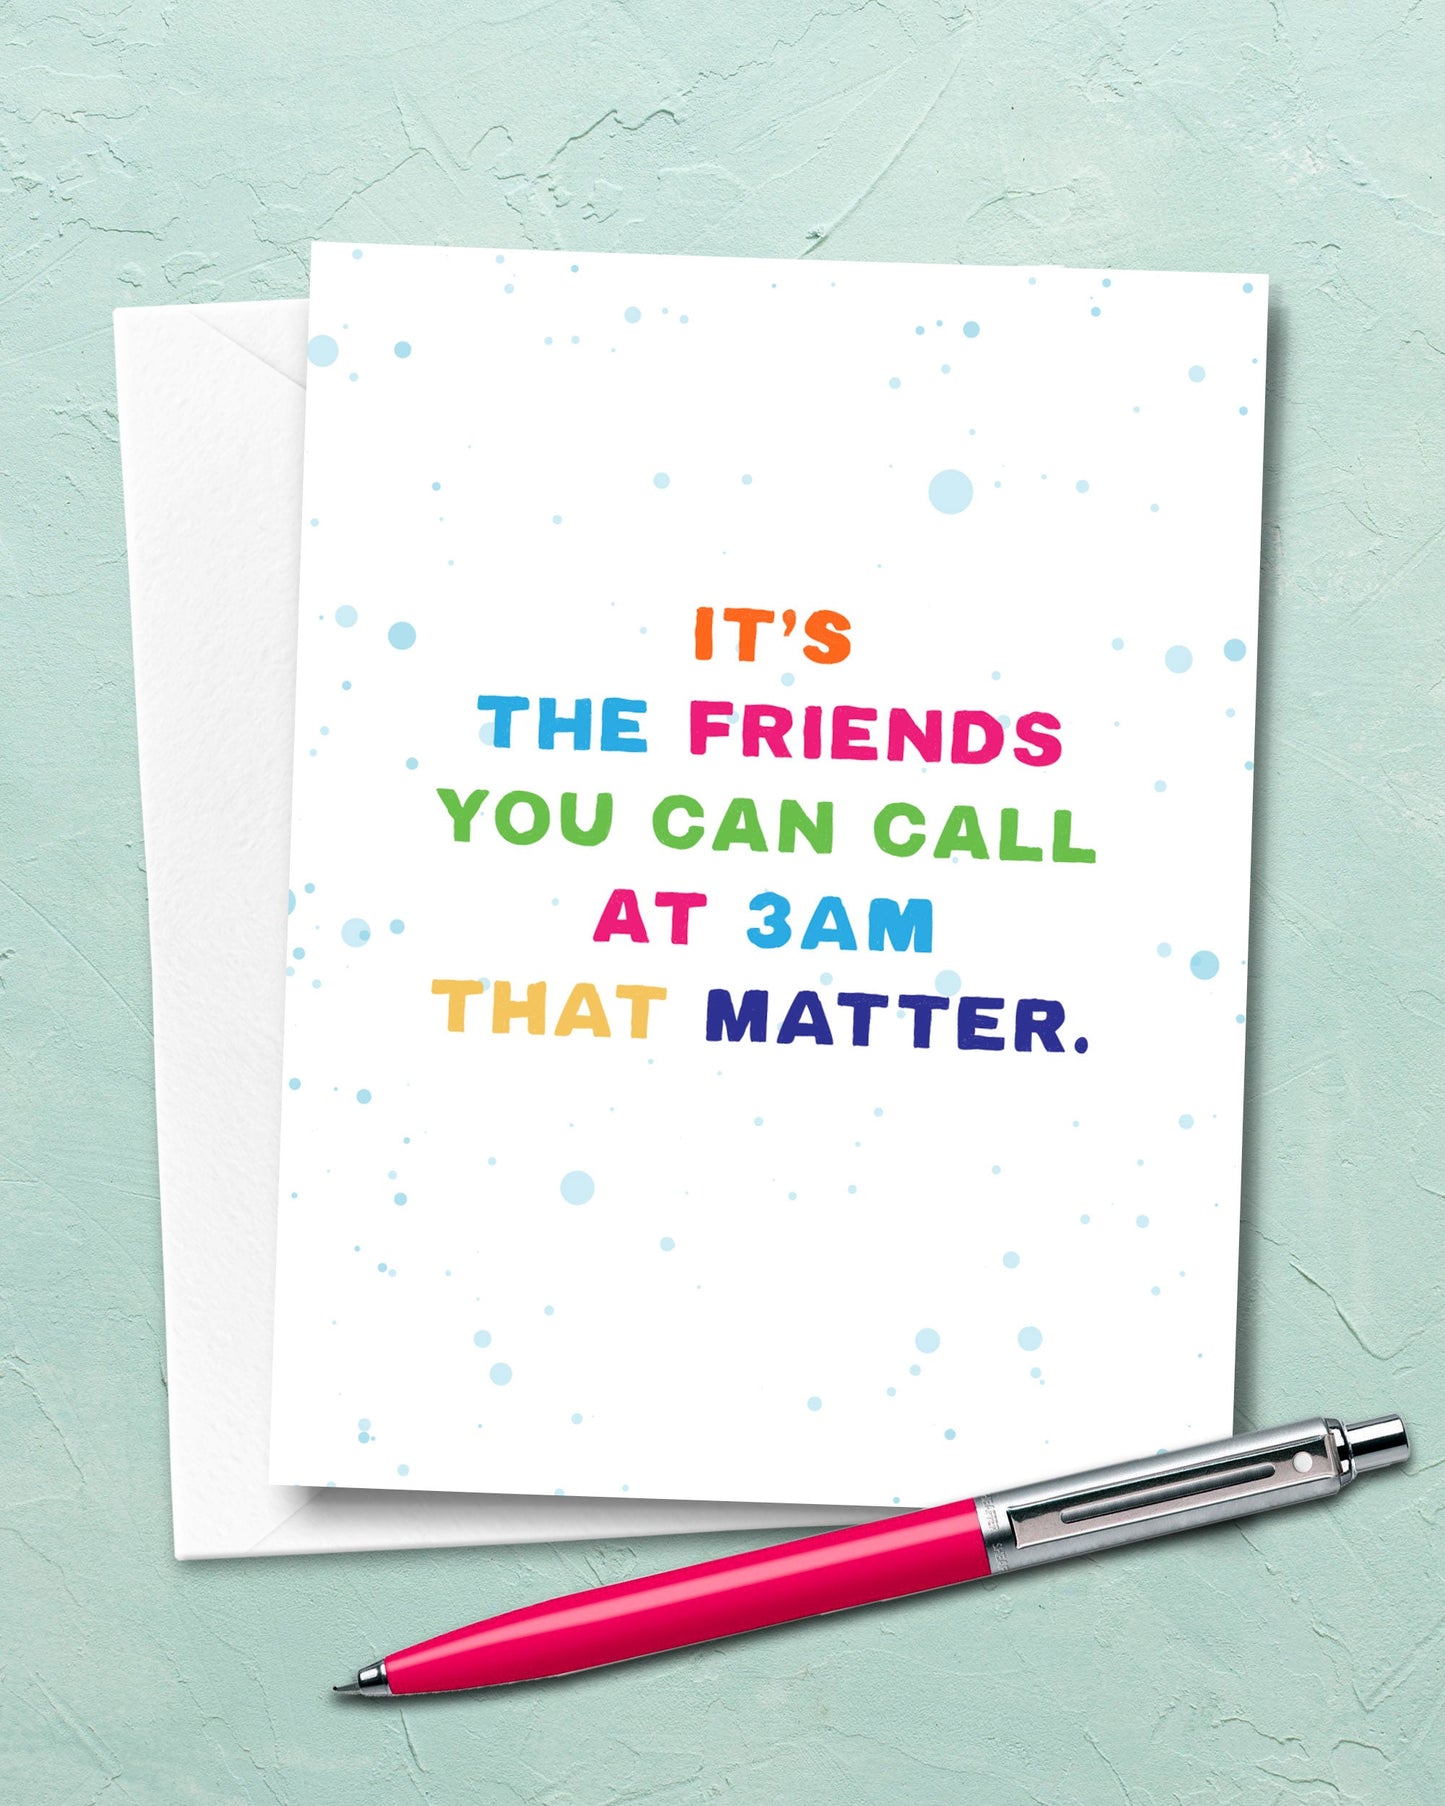 3 am Funny Friendship Card with red pen - Transit Design - Smirkantile